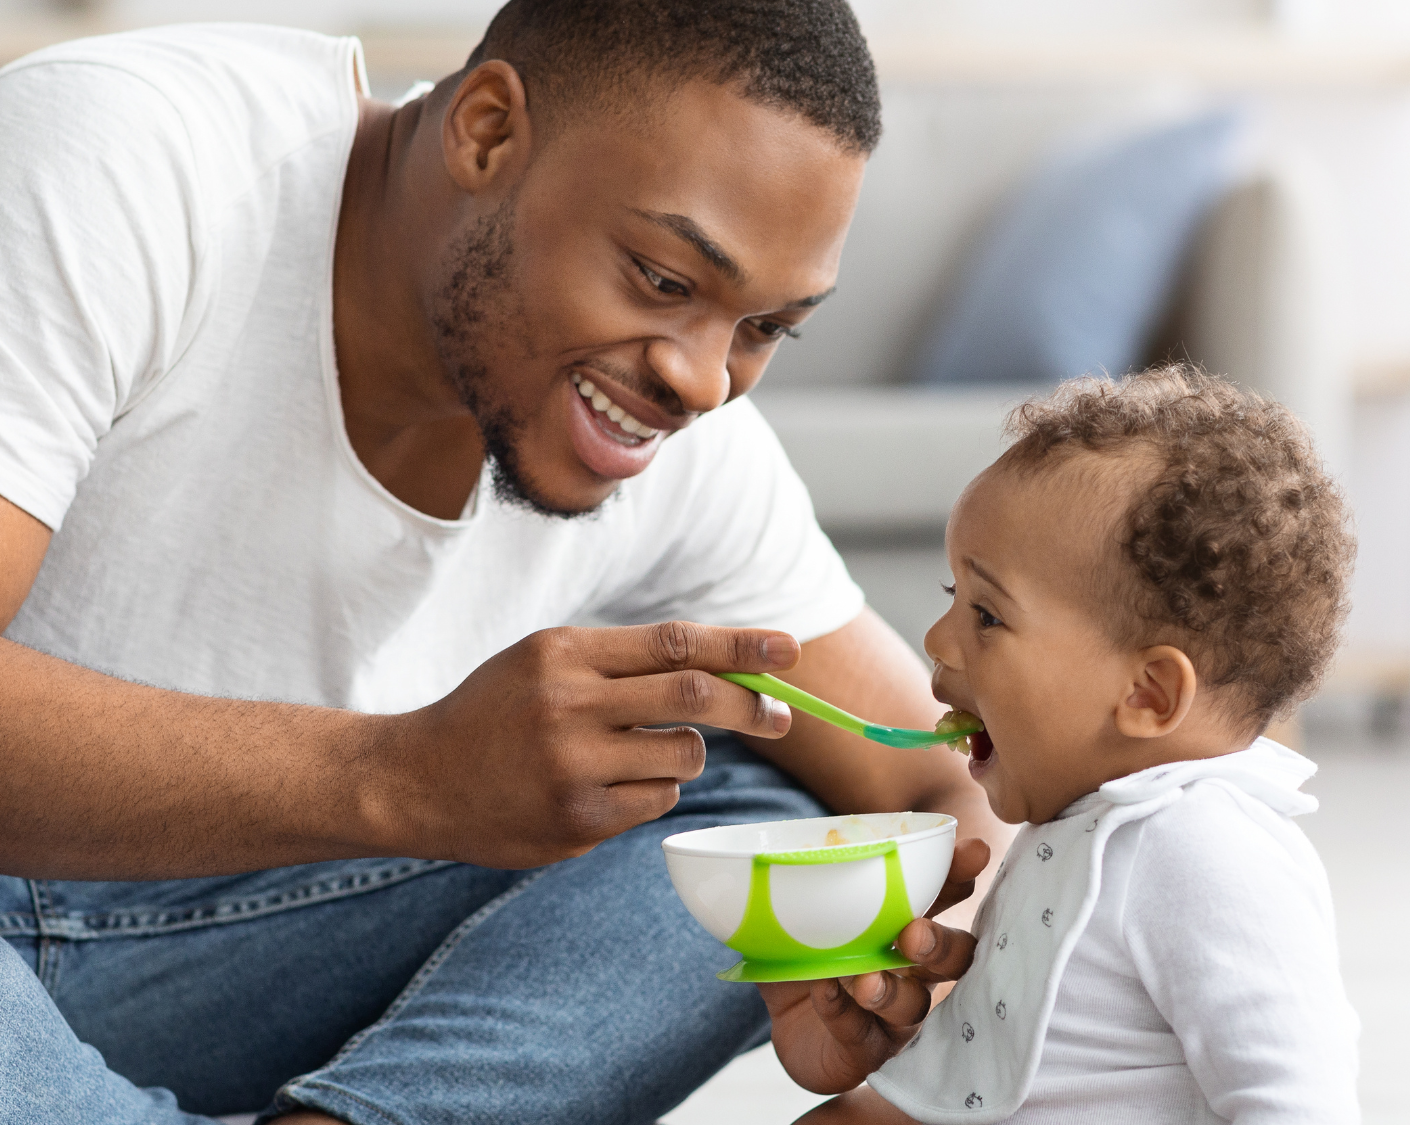 A man is seen smiling, sat cross legged on the floor. He is leaning forward, holding a small plastic bowl in one hand and a spoon in the other. He is offering the spoon of food to a baby who has their mouth open.